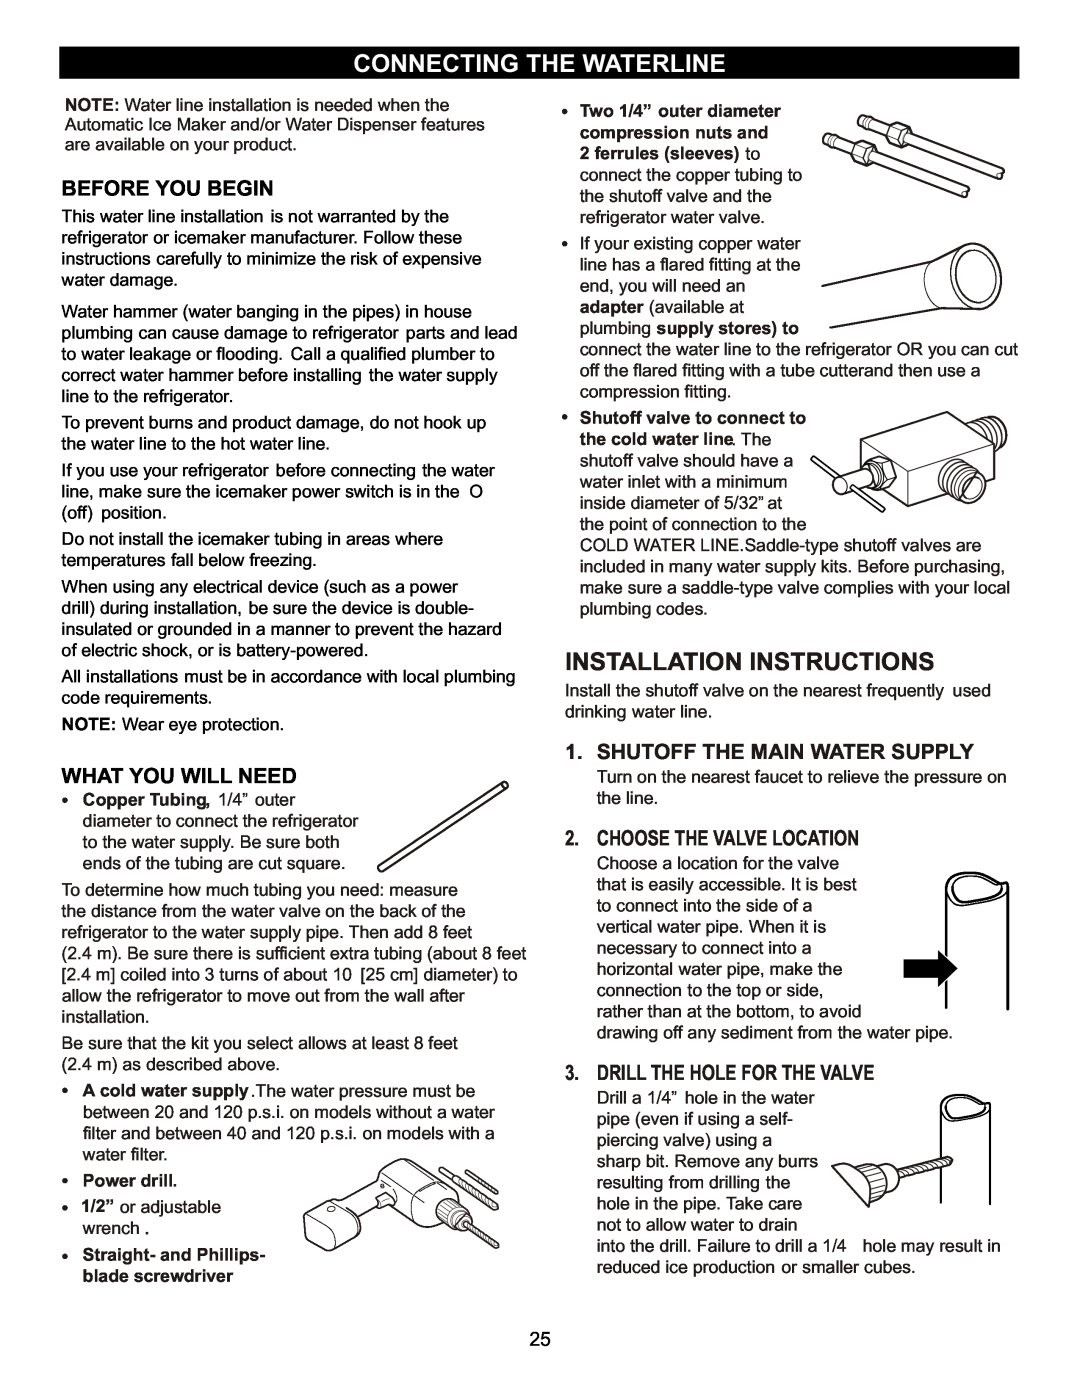 LG Electronics LFC23760 Connecting The Waterline, Installation Instructions, Before You Begin, What You Will Need 